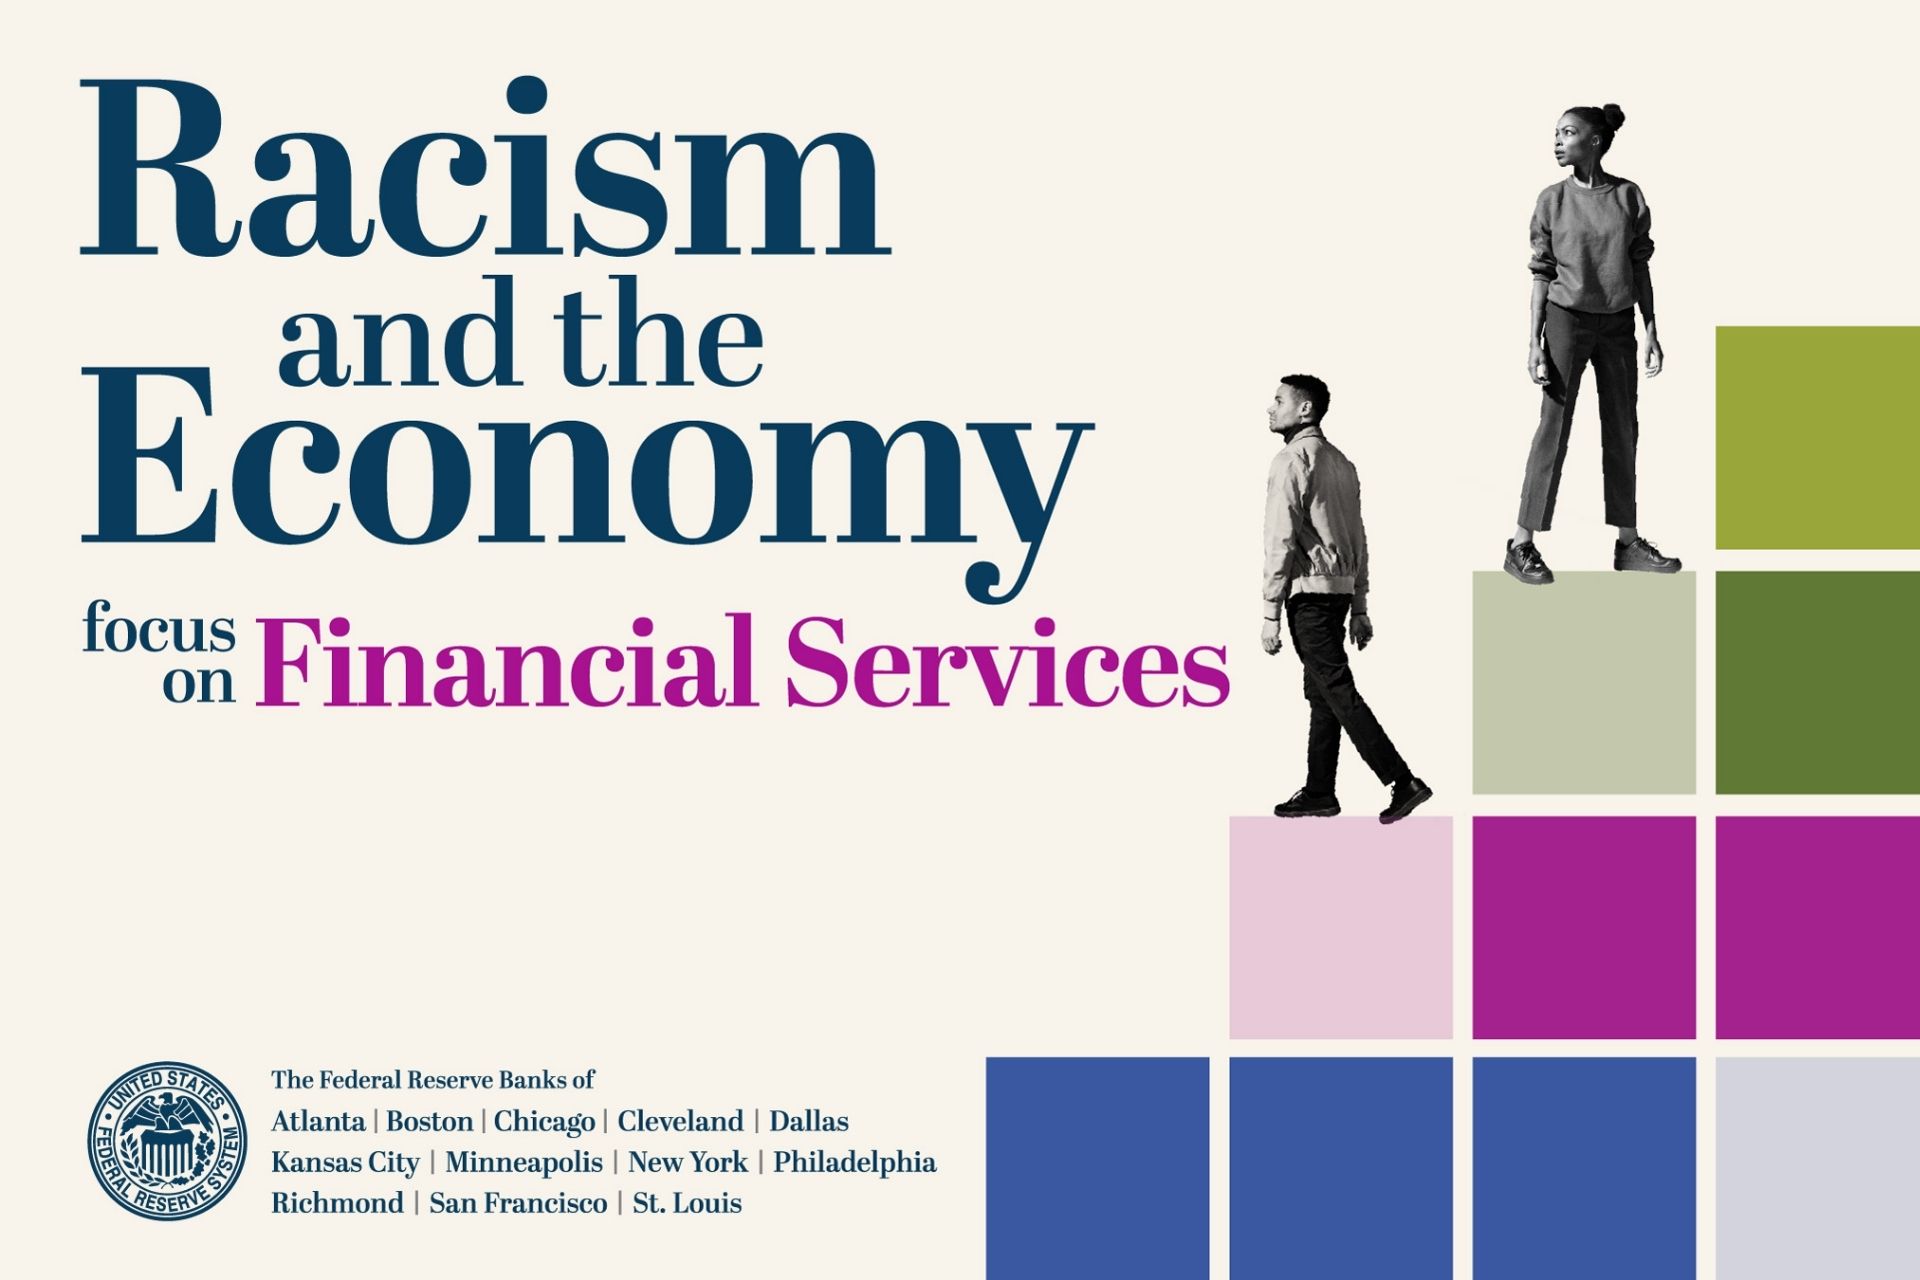 Racism and the Economy: Focus on Financial Services